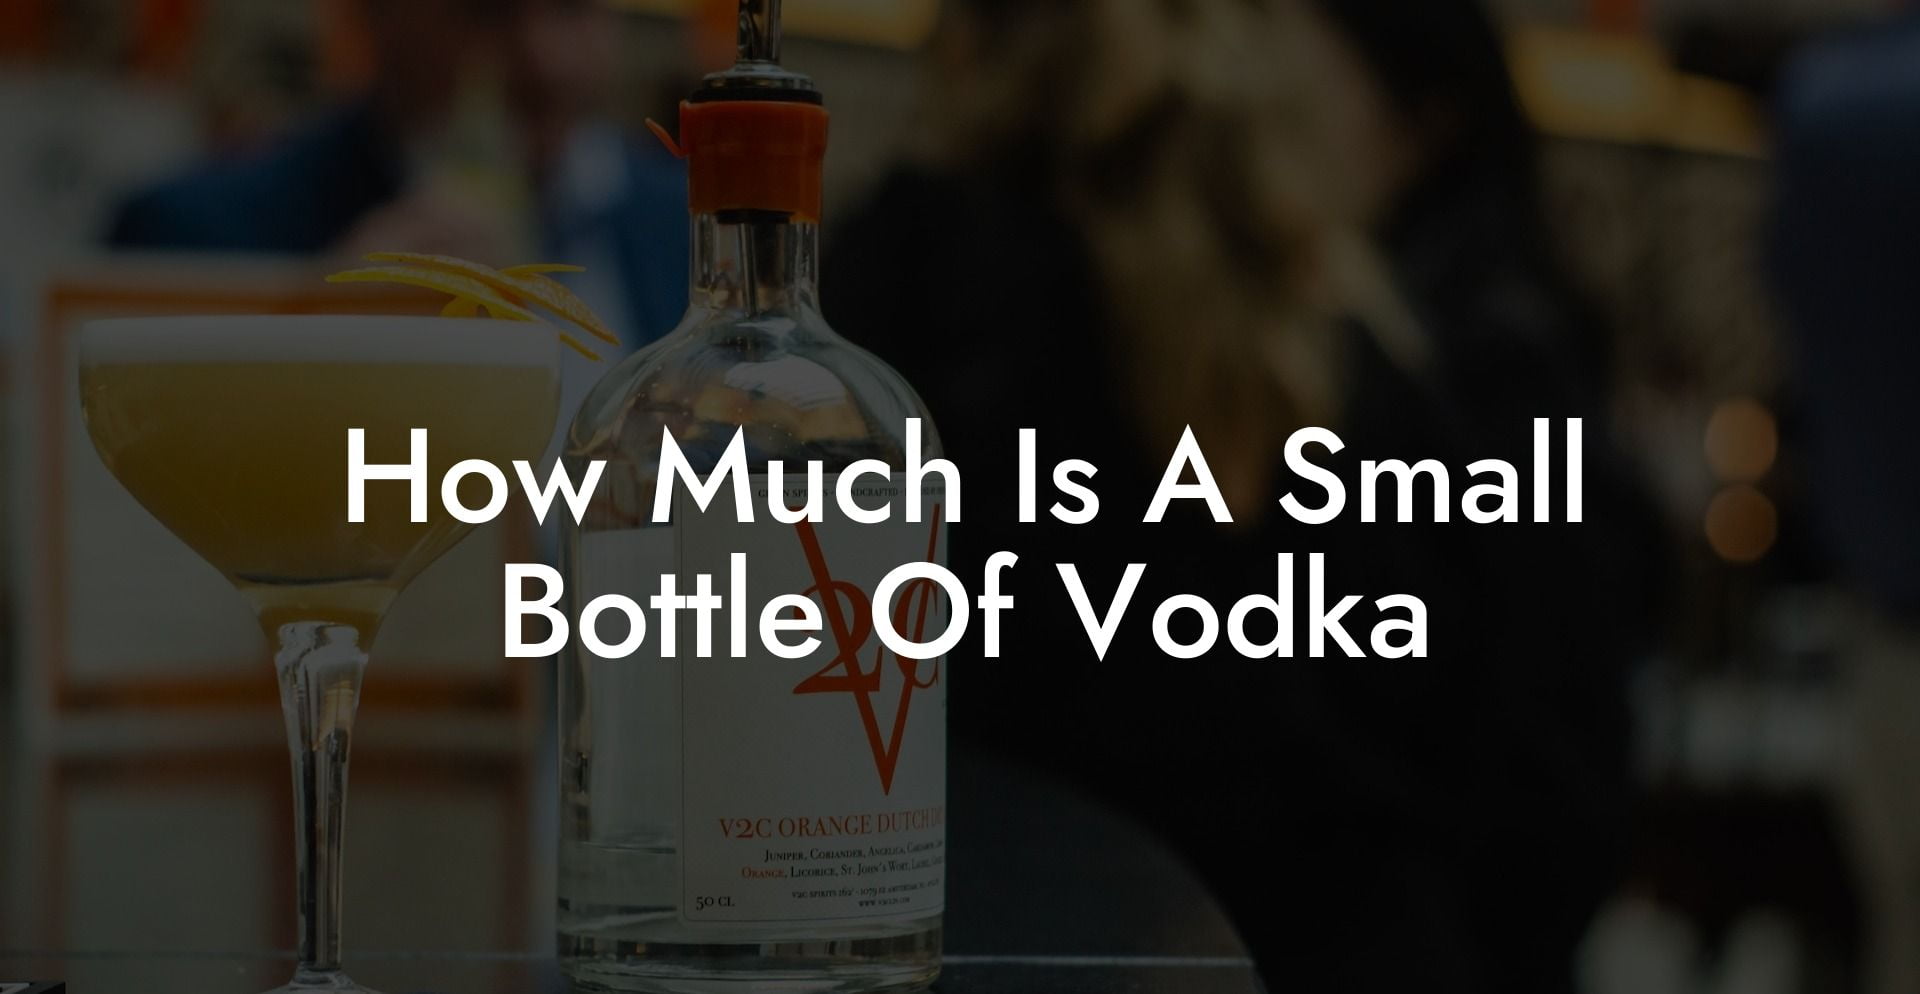 How Much Is A Small Bottle Of Vodka